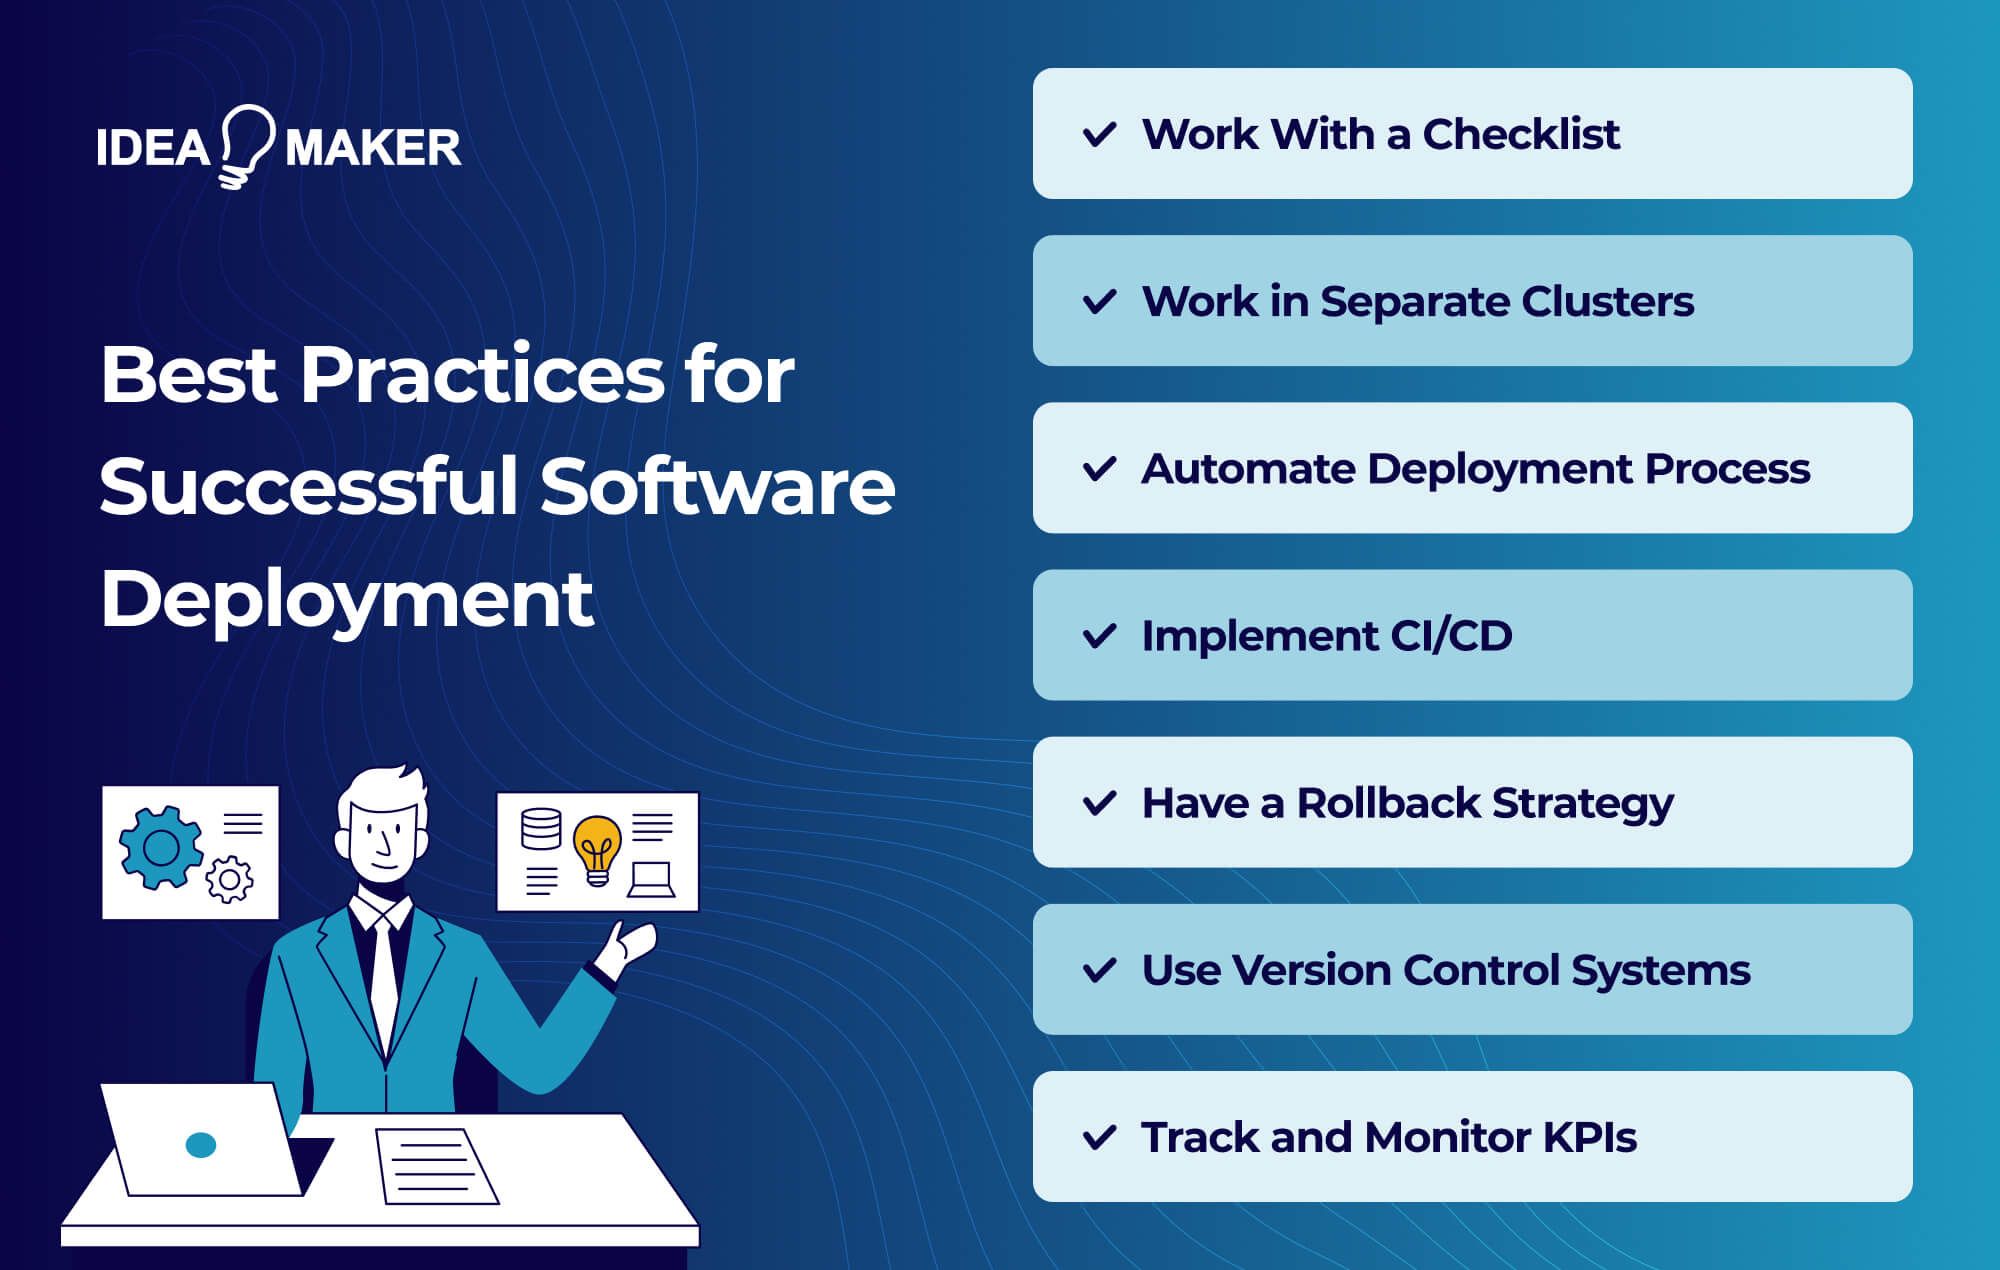 Ideamaker - Best Practices for Successful Software Deployment